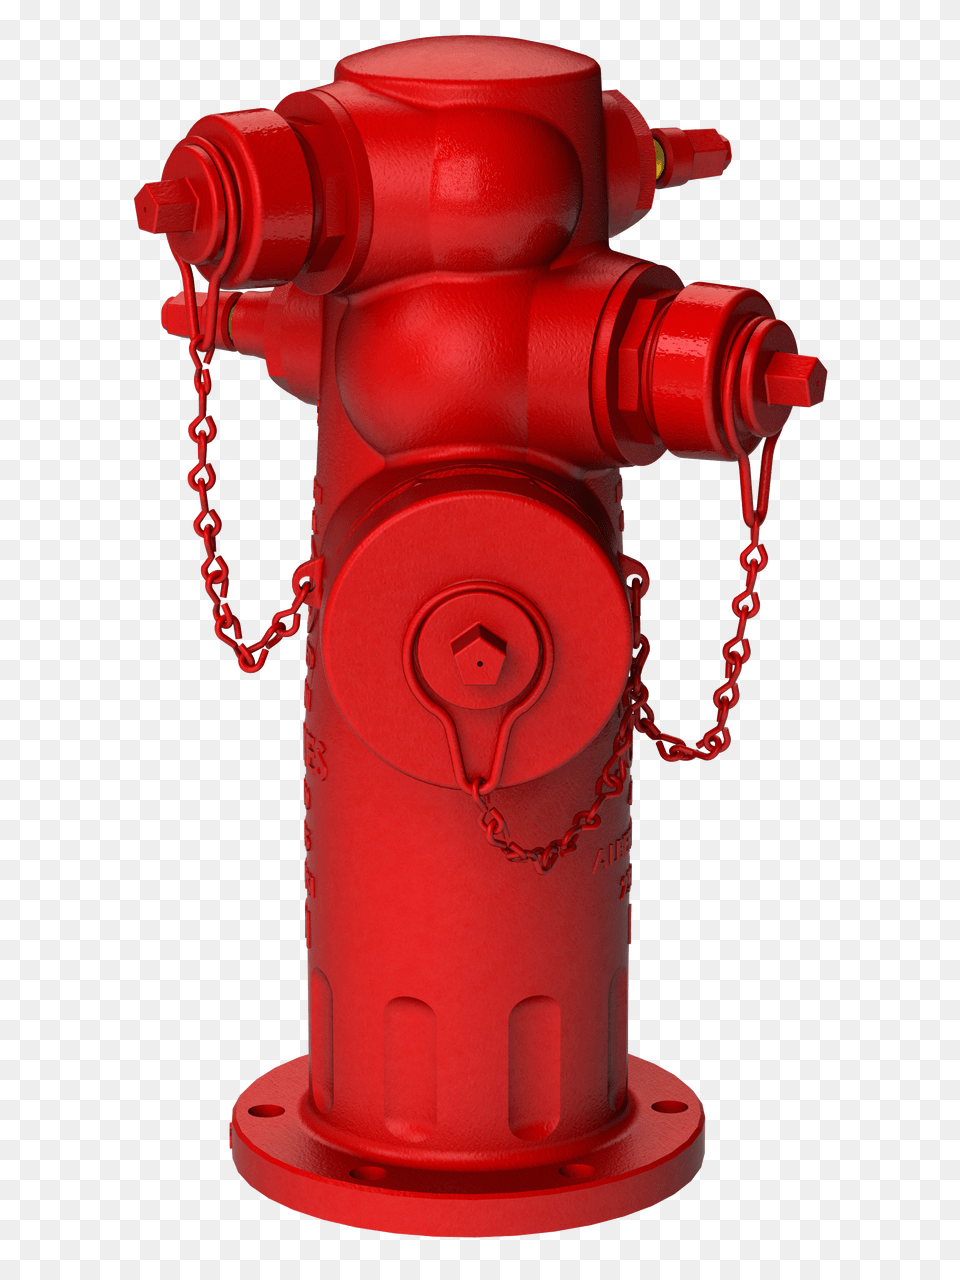 Red Tif V2 Nb, Fire Hydrant, Hydrant Free Transparent Png